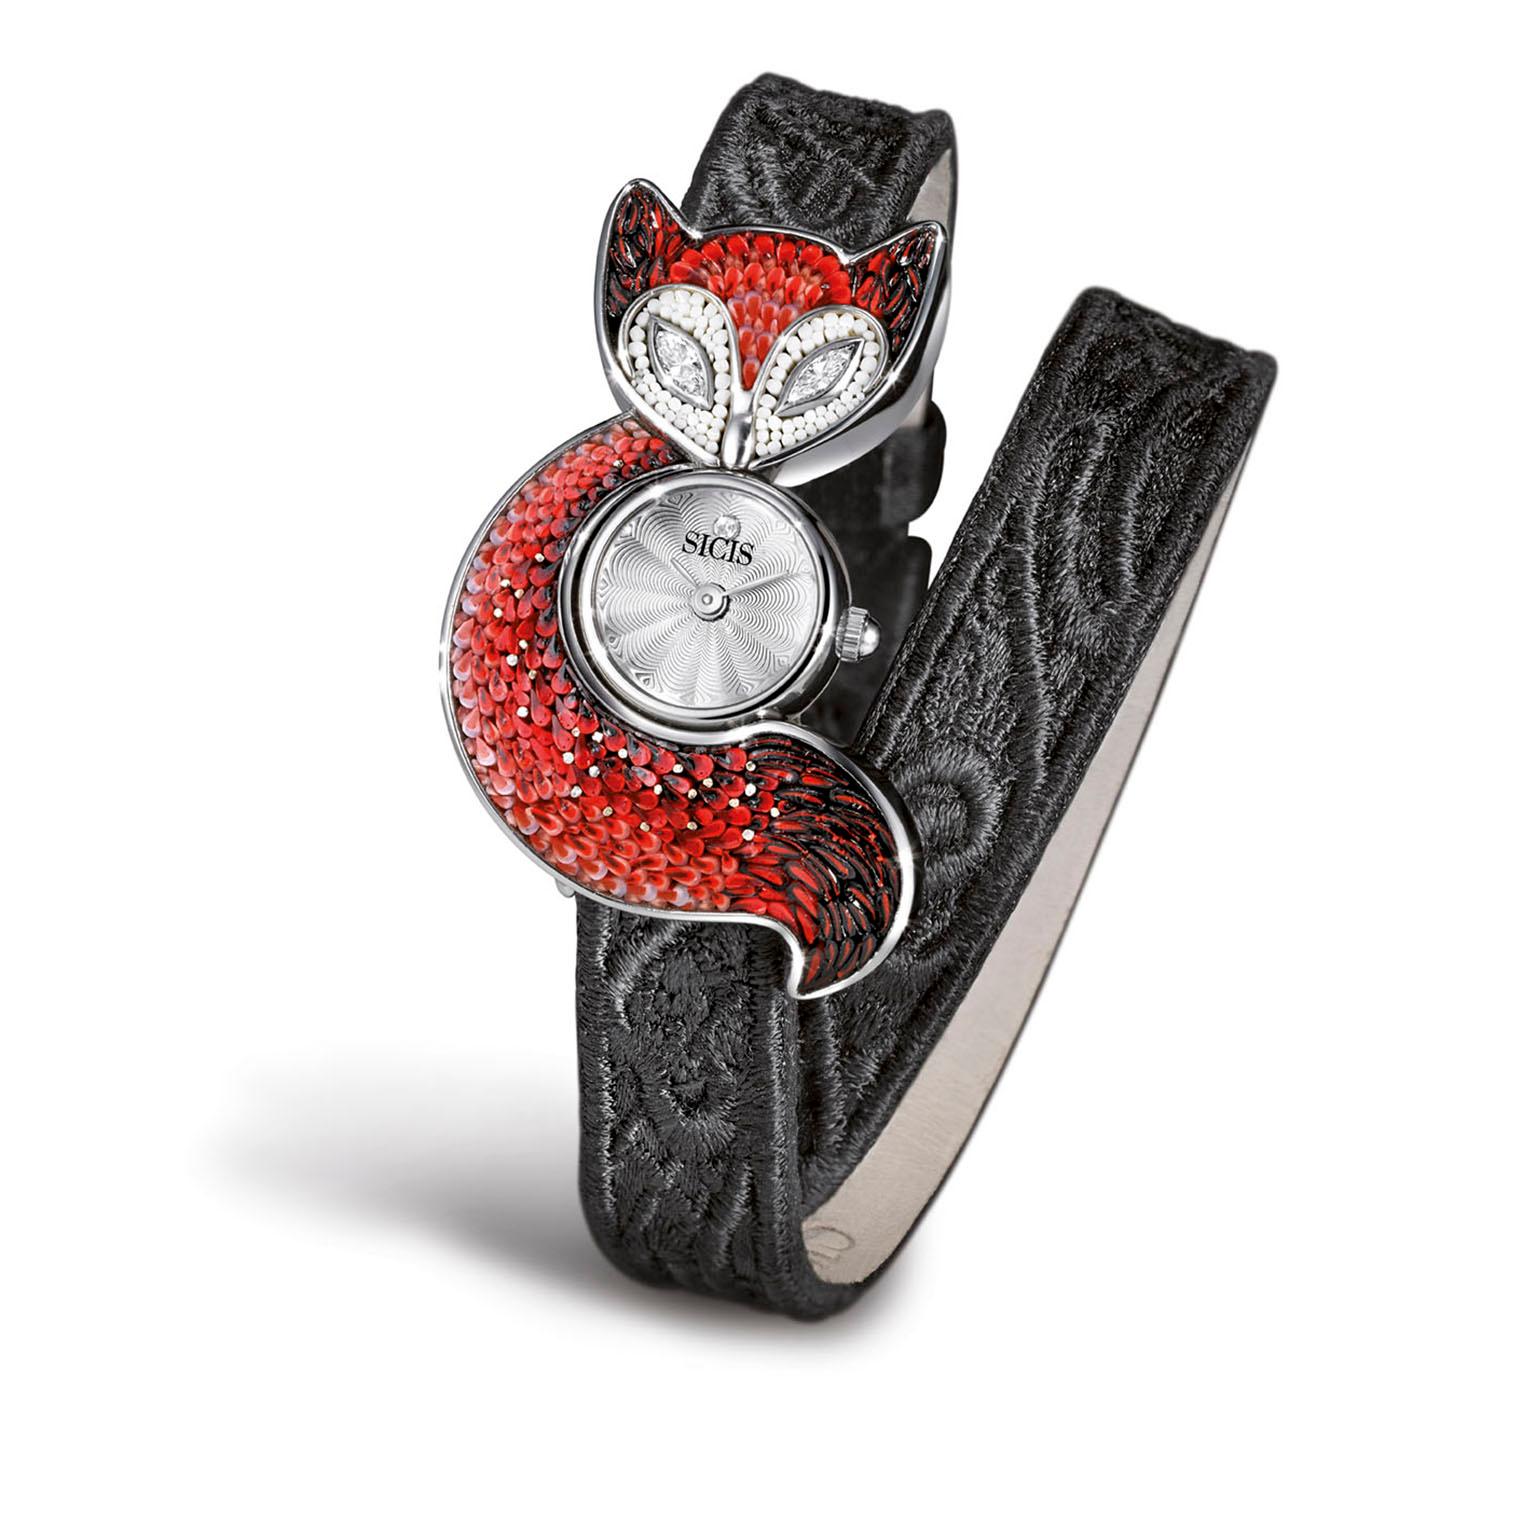 Marquise Cut Stylis Wristwatch Steel Case White Diamond Handmade Decorated Micromosaic  For Sale